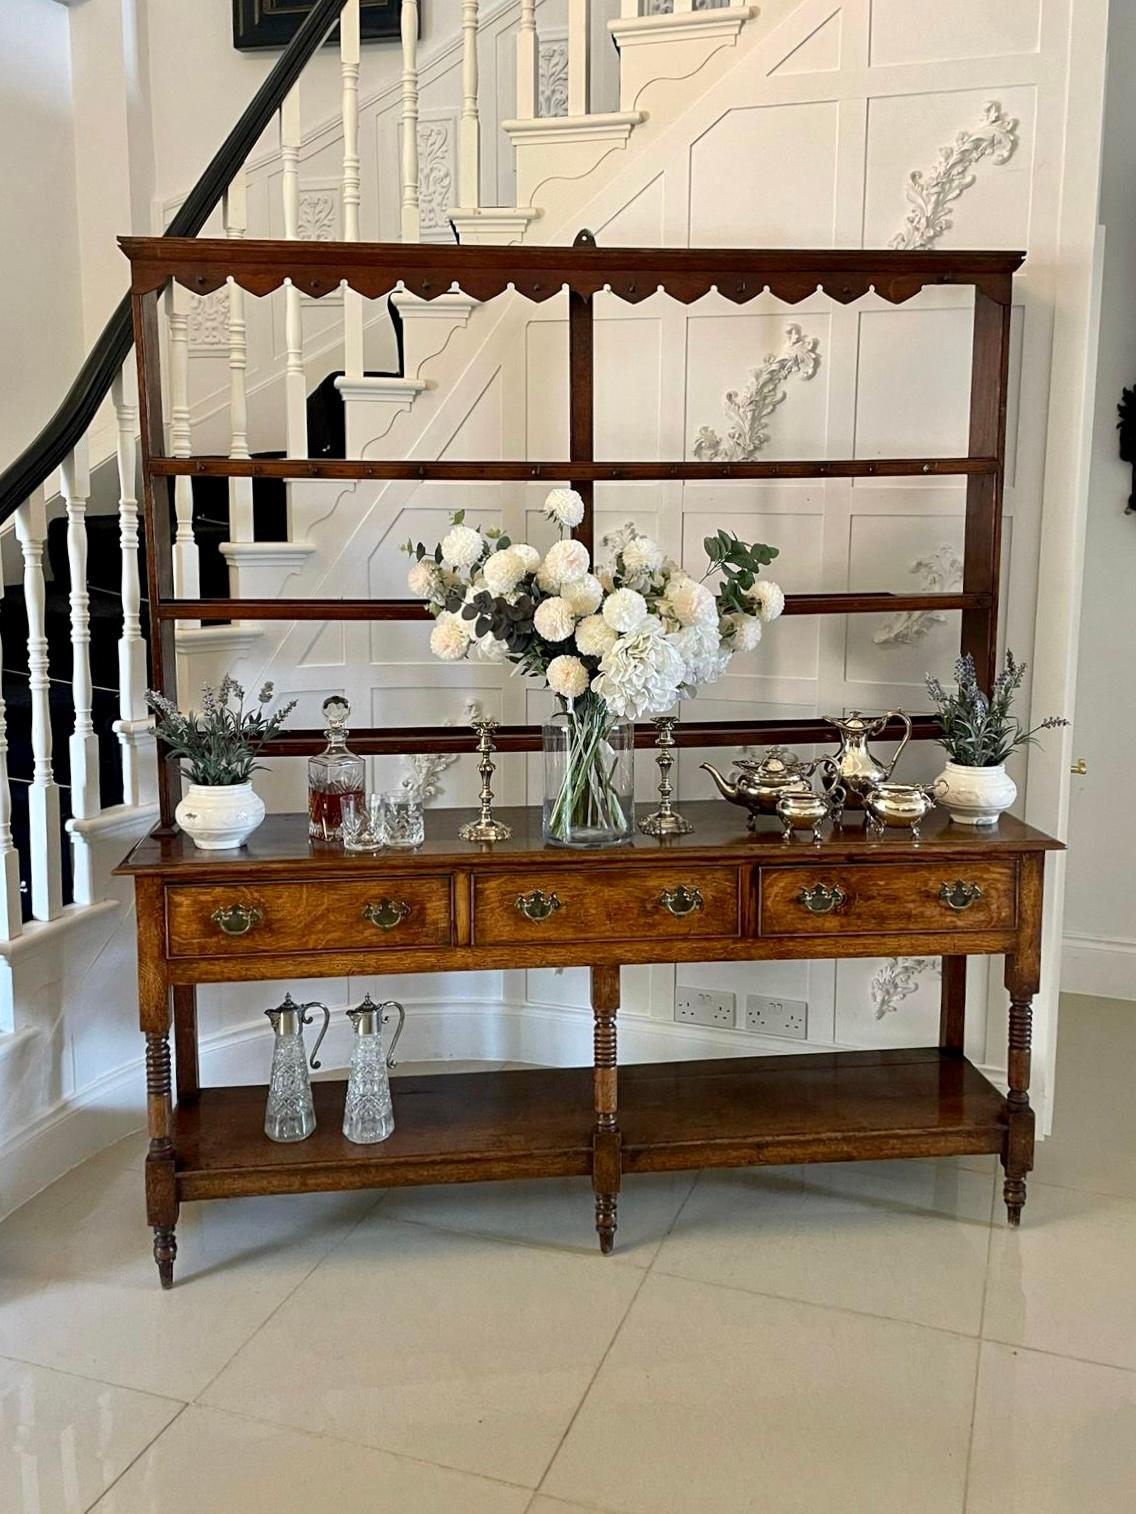 Antique 18th century George III quality oak dresser and original rack having the original oak plate rack with brass hooks above an oak dresser base with three cockbeeded drawers, brass handles, unusual turned column supports standing on turned legs